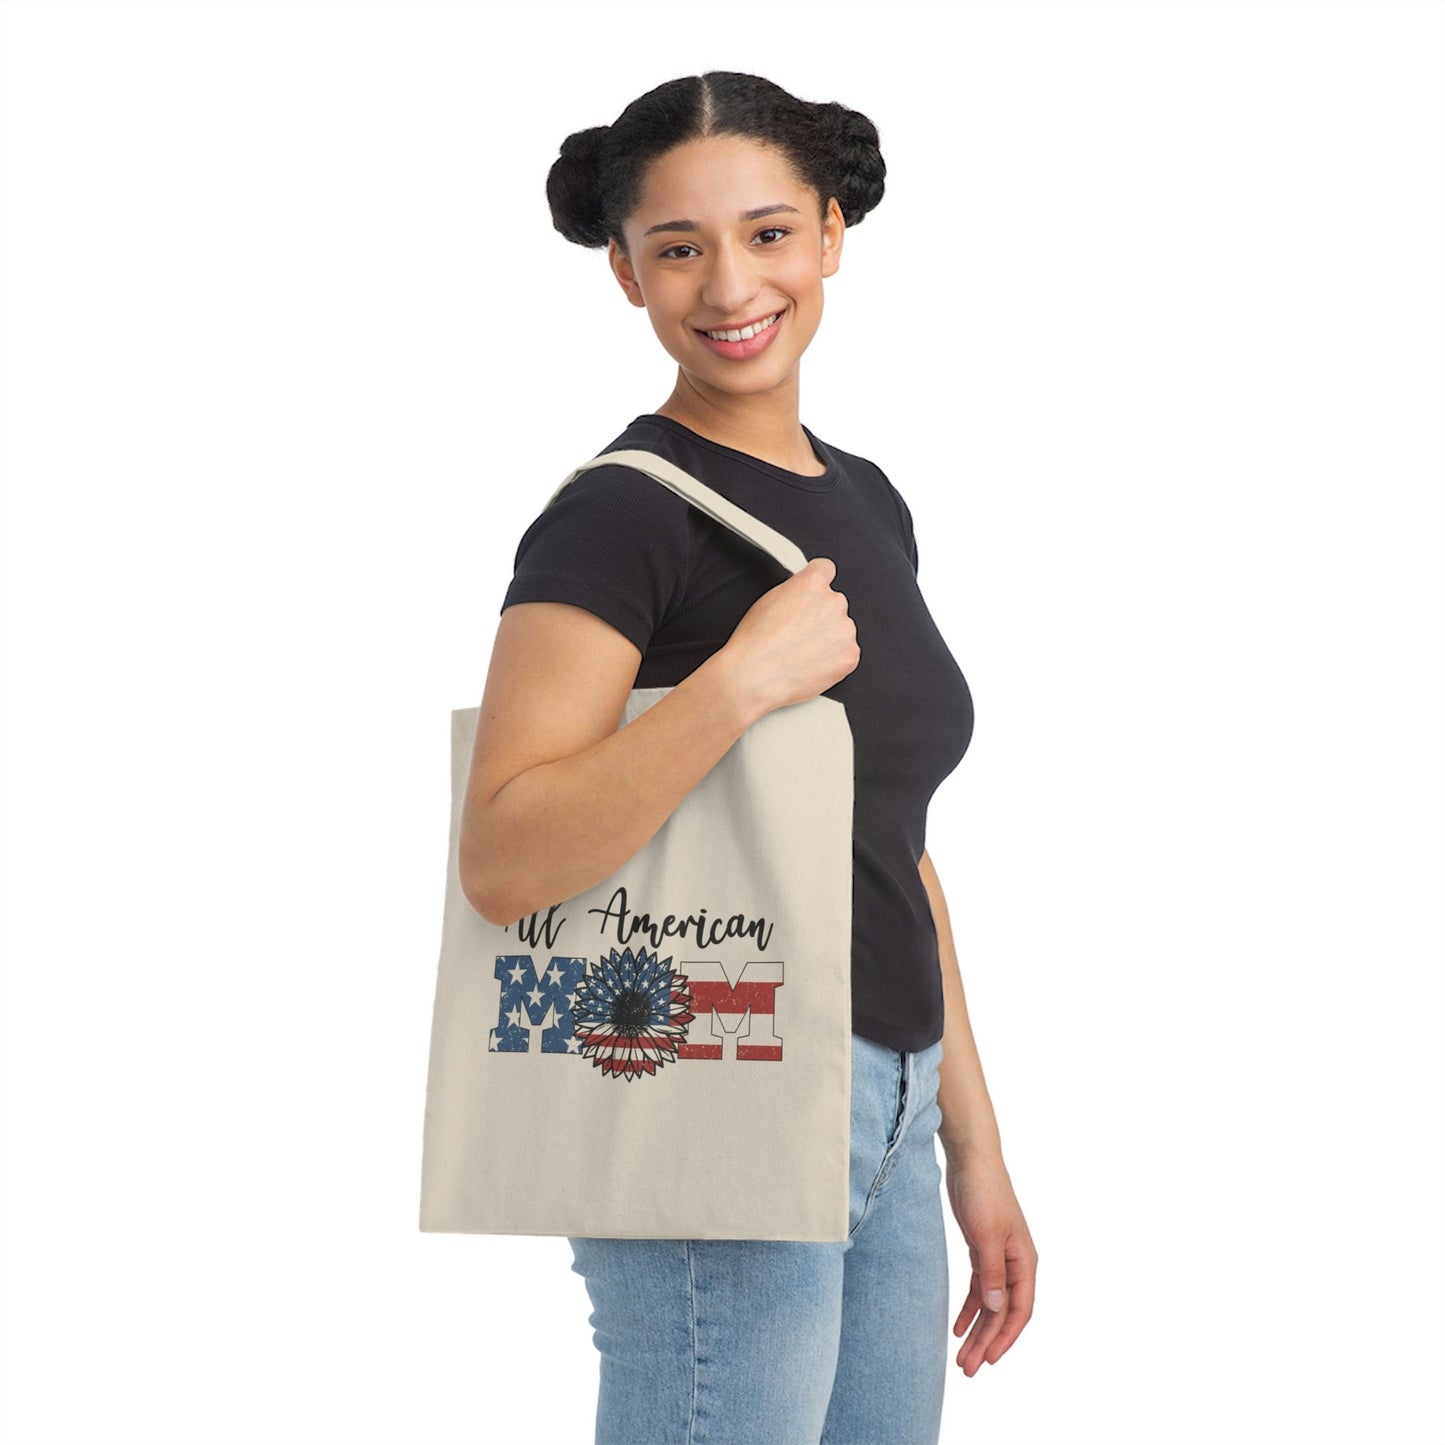 All American Mom Canvas Tote Bag with Patriotic Sunflower